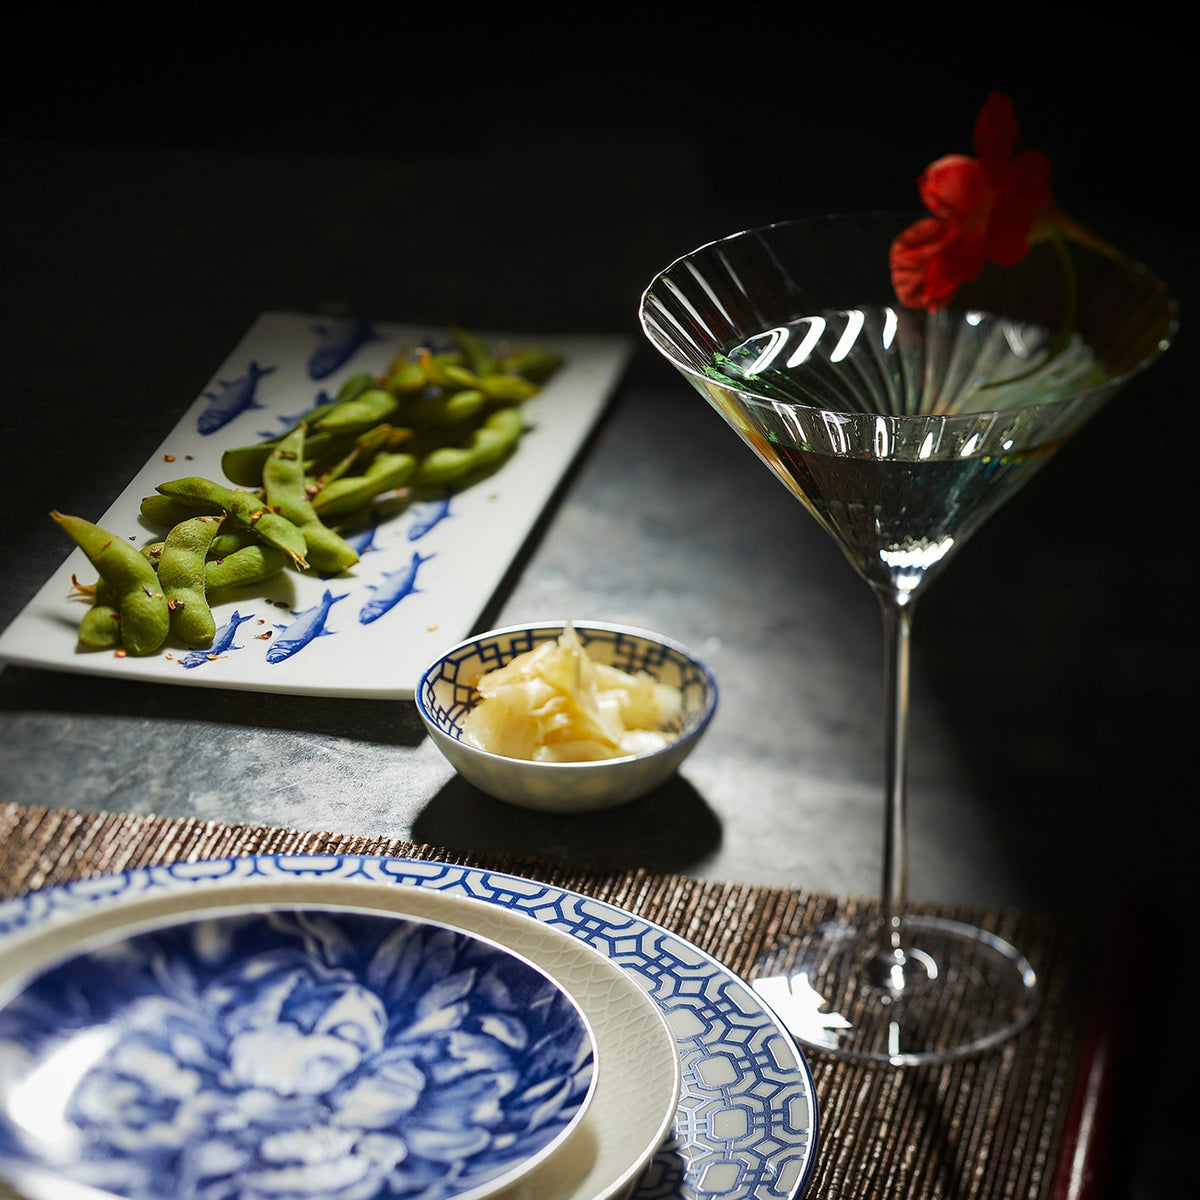 A cocktail garnished with a red flower is on a table beside a plate of edamame, a small bowl of pickled ginger, and a patterned dish featuring an interlocking lattice pattern from the Newport Dipping Dishes, Set of 4 by Caskata.